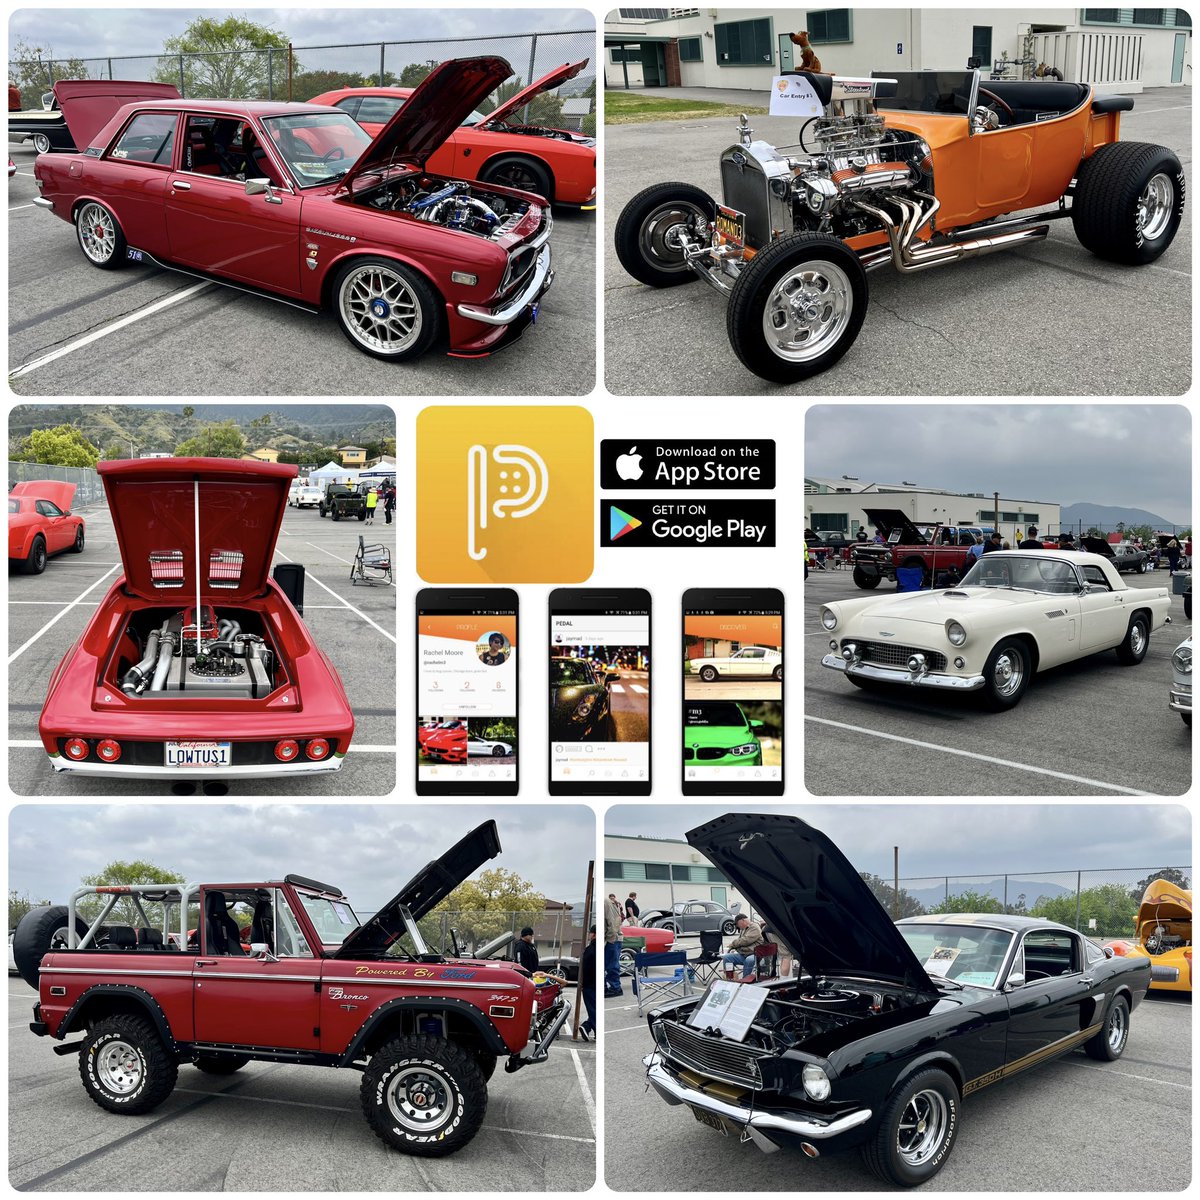 🔶 John Muir Middle School 2nd Annual Classic Car Show
🔶 See more on PEDAL ~ Free in app stores

#johnmuirmiddleschool #classiccarshow #classiccars #datsunbluebird #jdm #hotrod #customcars #lotuseuropa #chipfoose #overhaulin #fordthunderbird #fordbronco #pedaltheapp